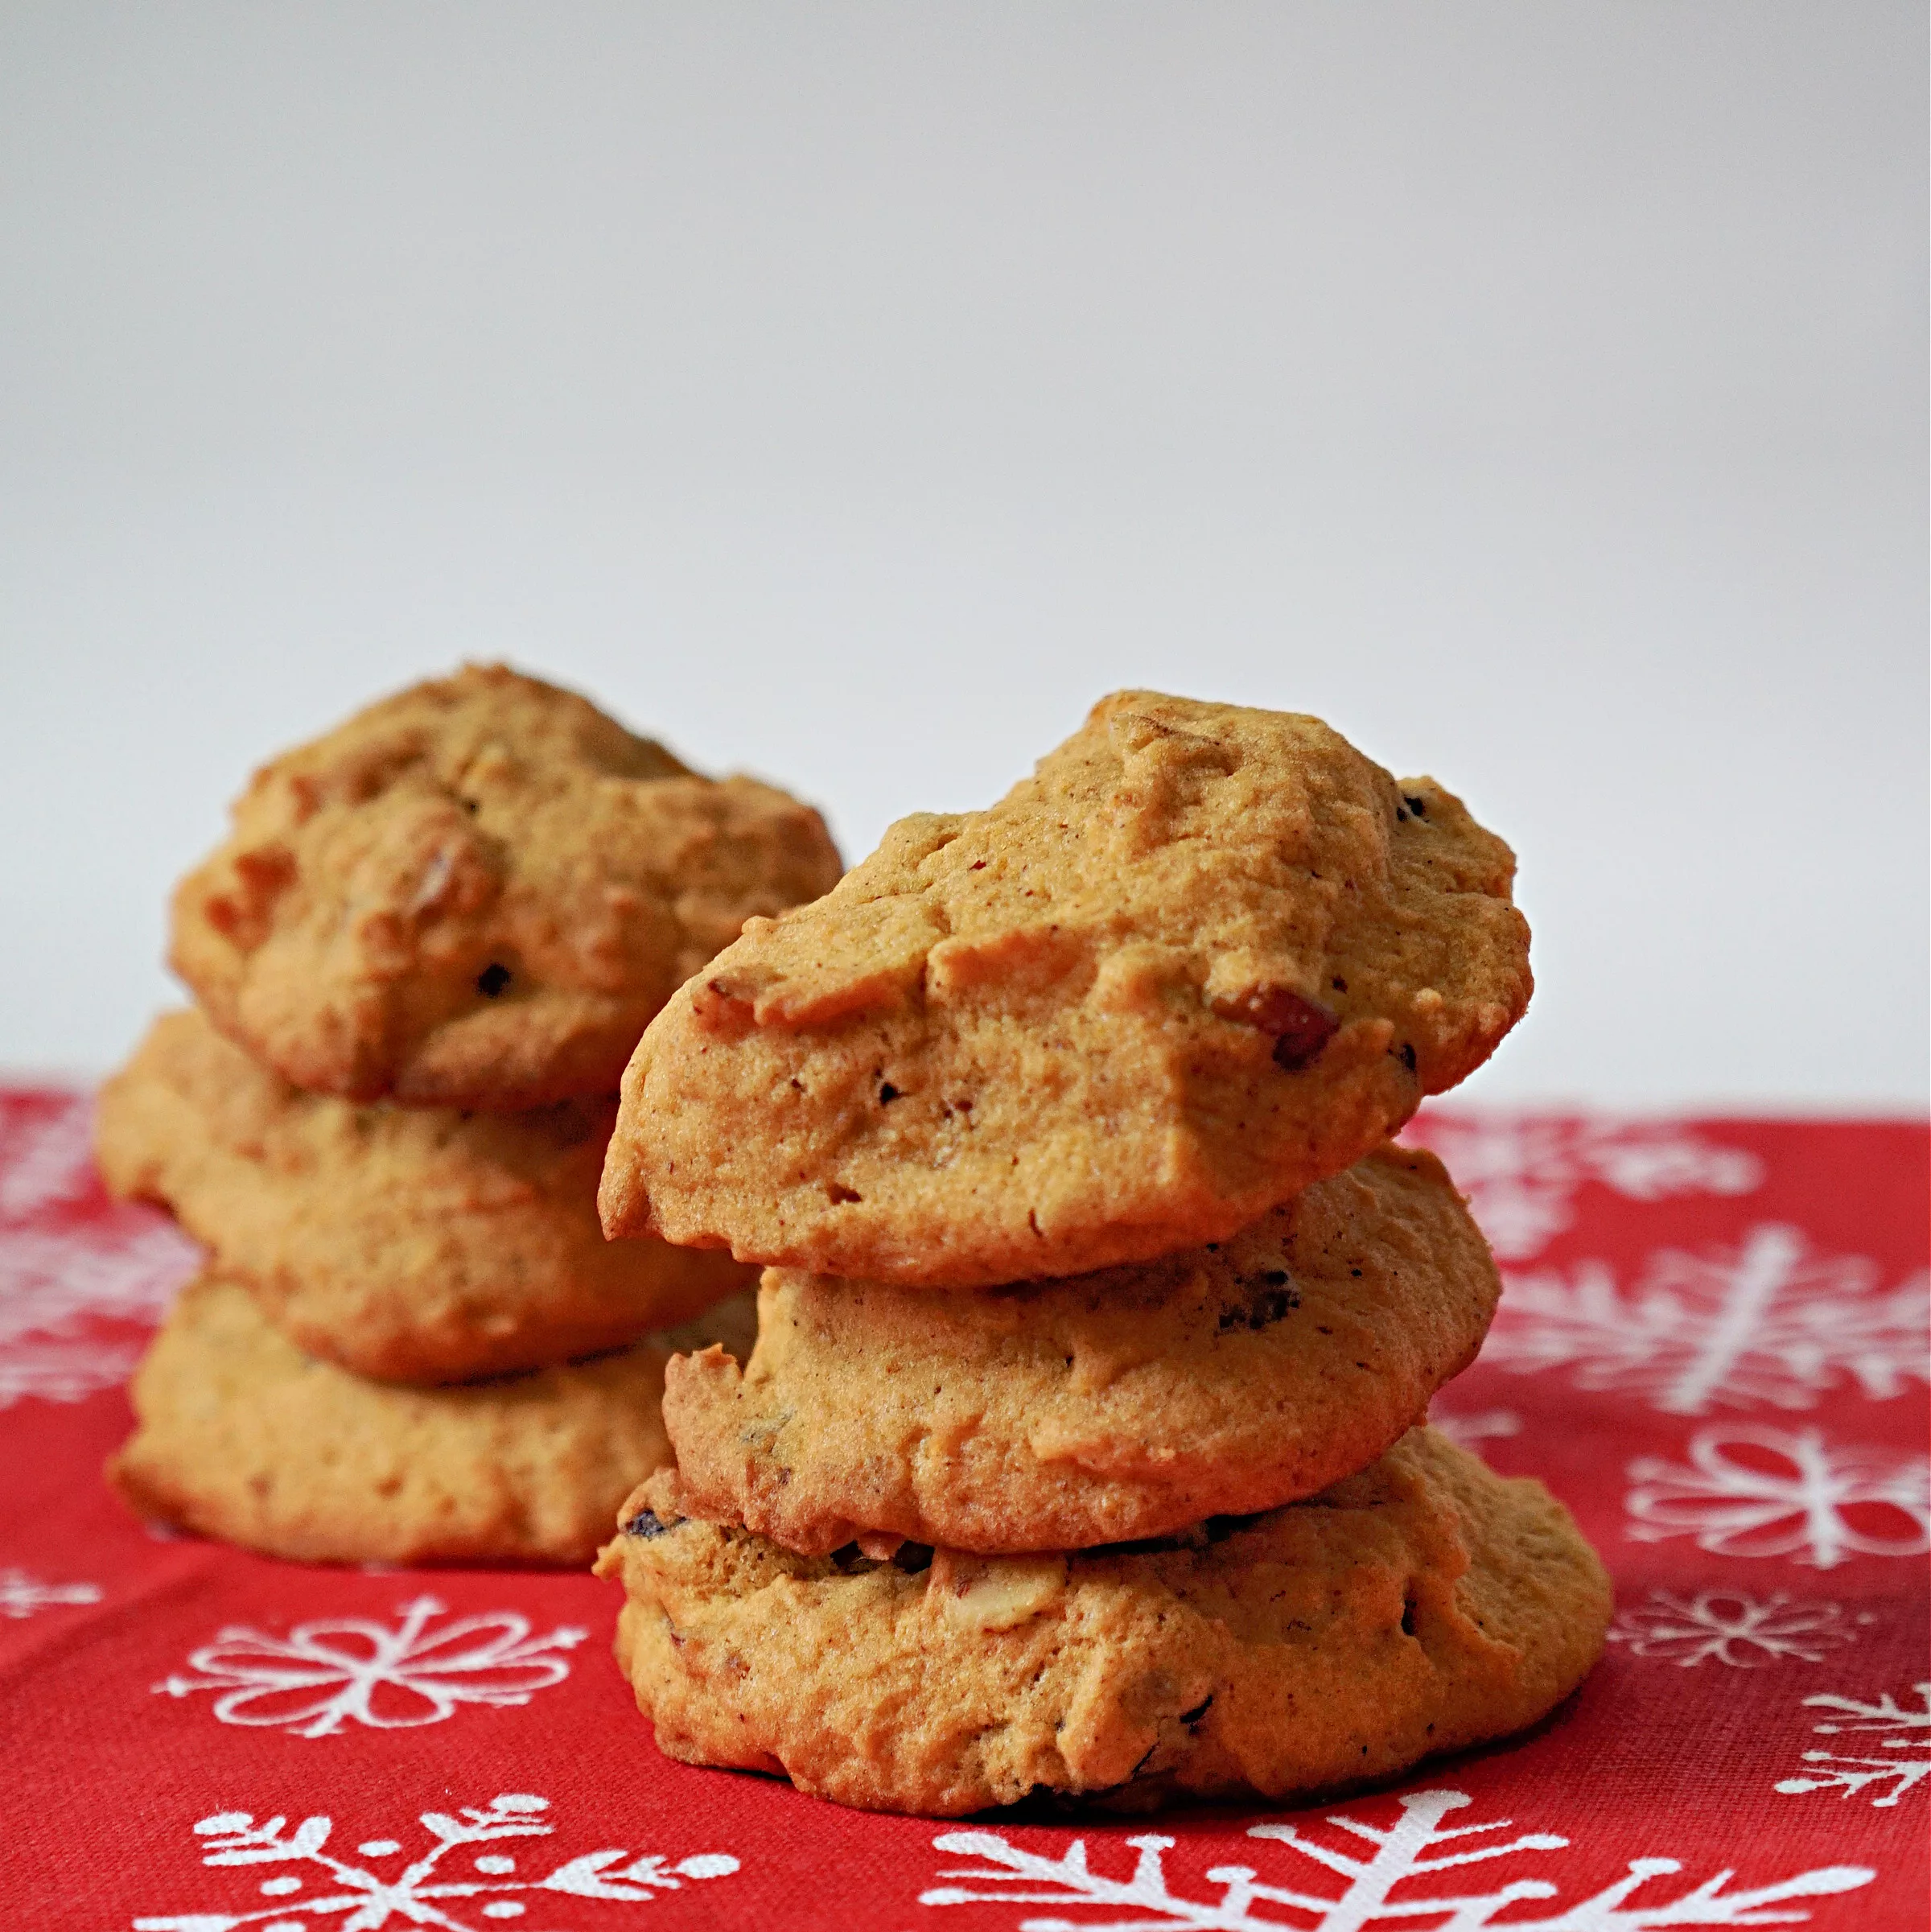 Old Fashioned Pumpkin Spice Cookies Recipe